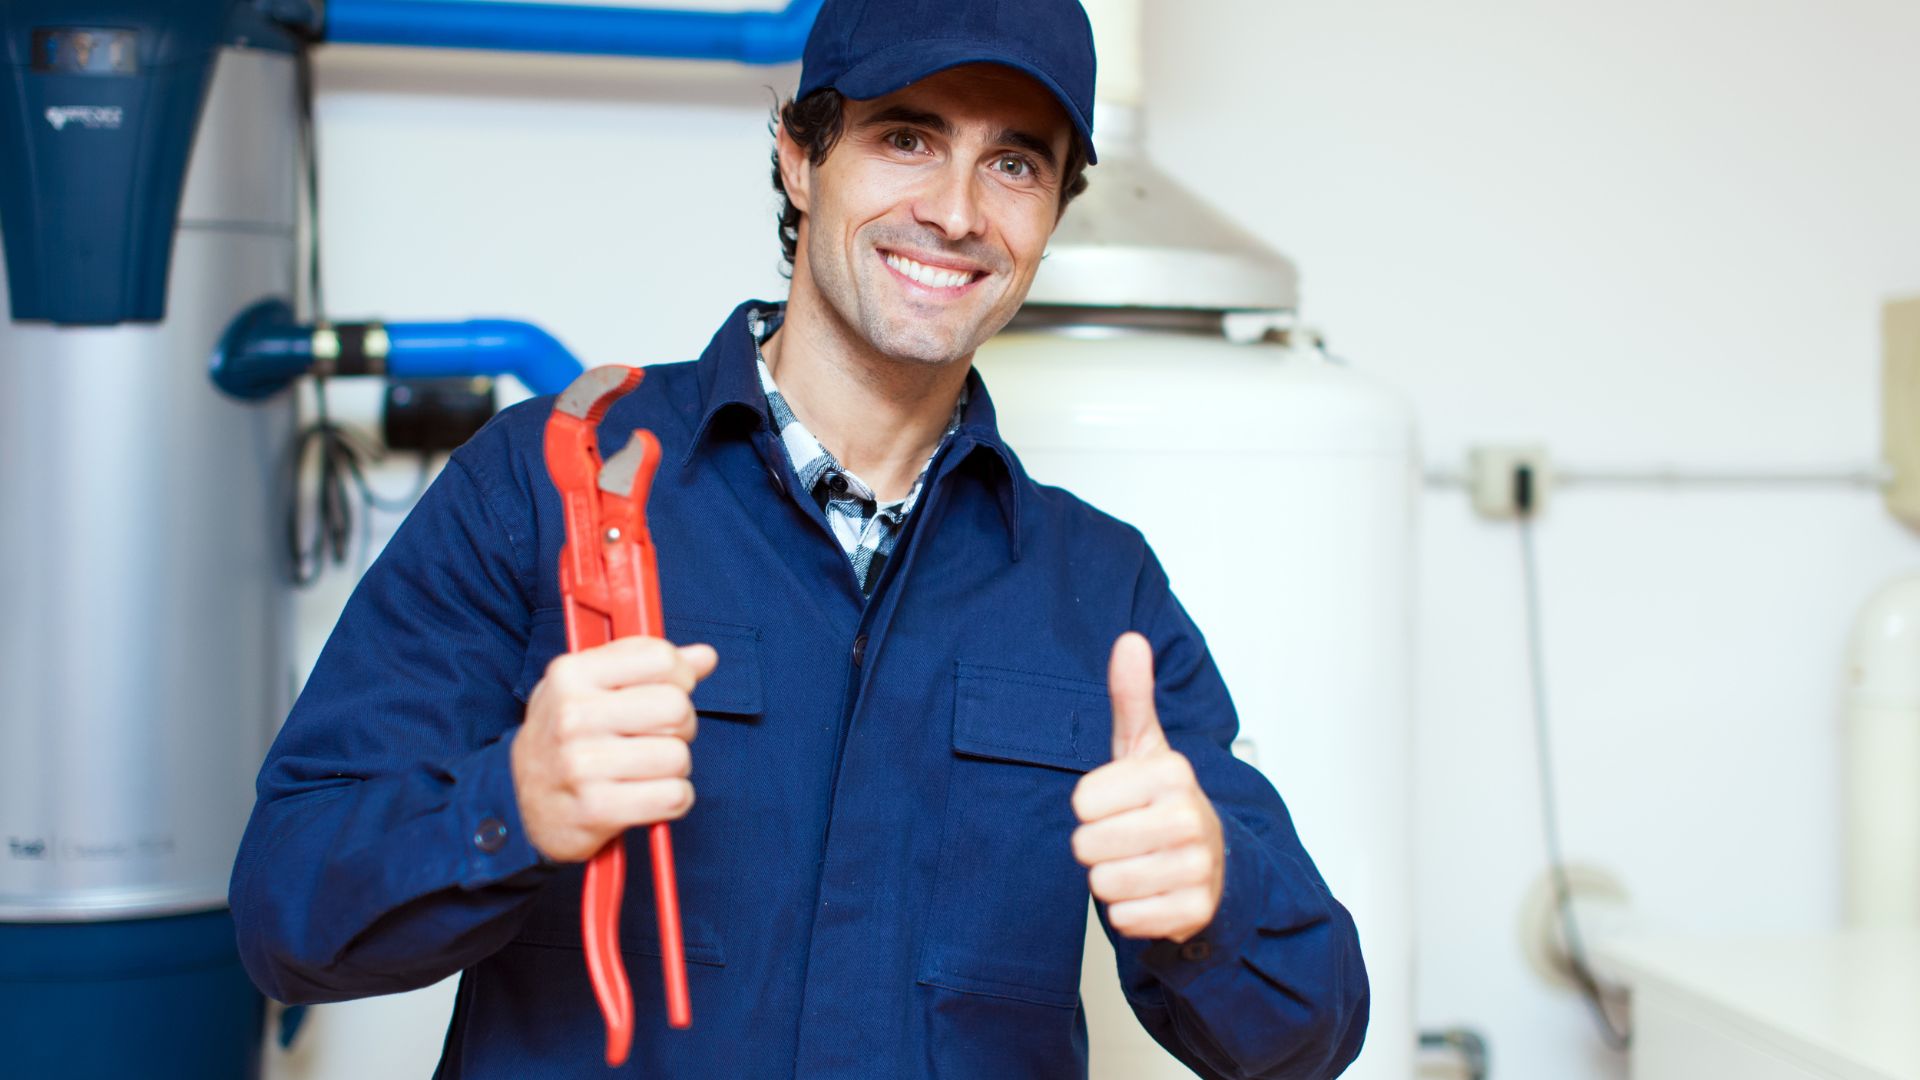 Our group of certified plumbers provides